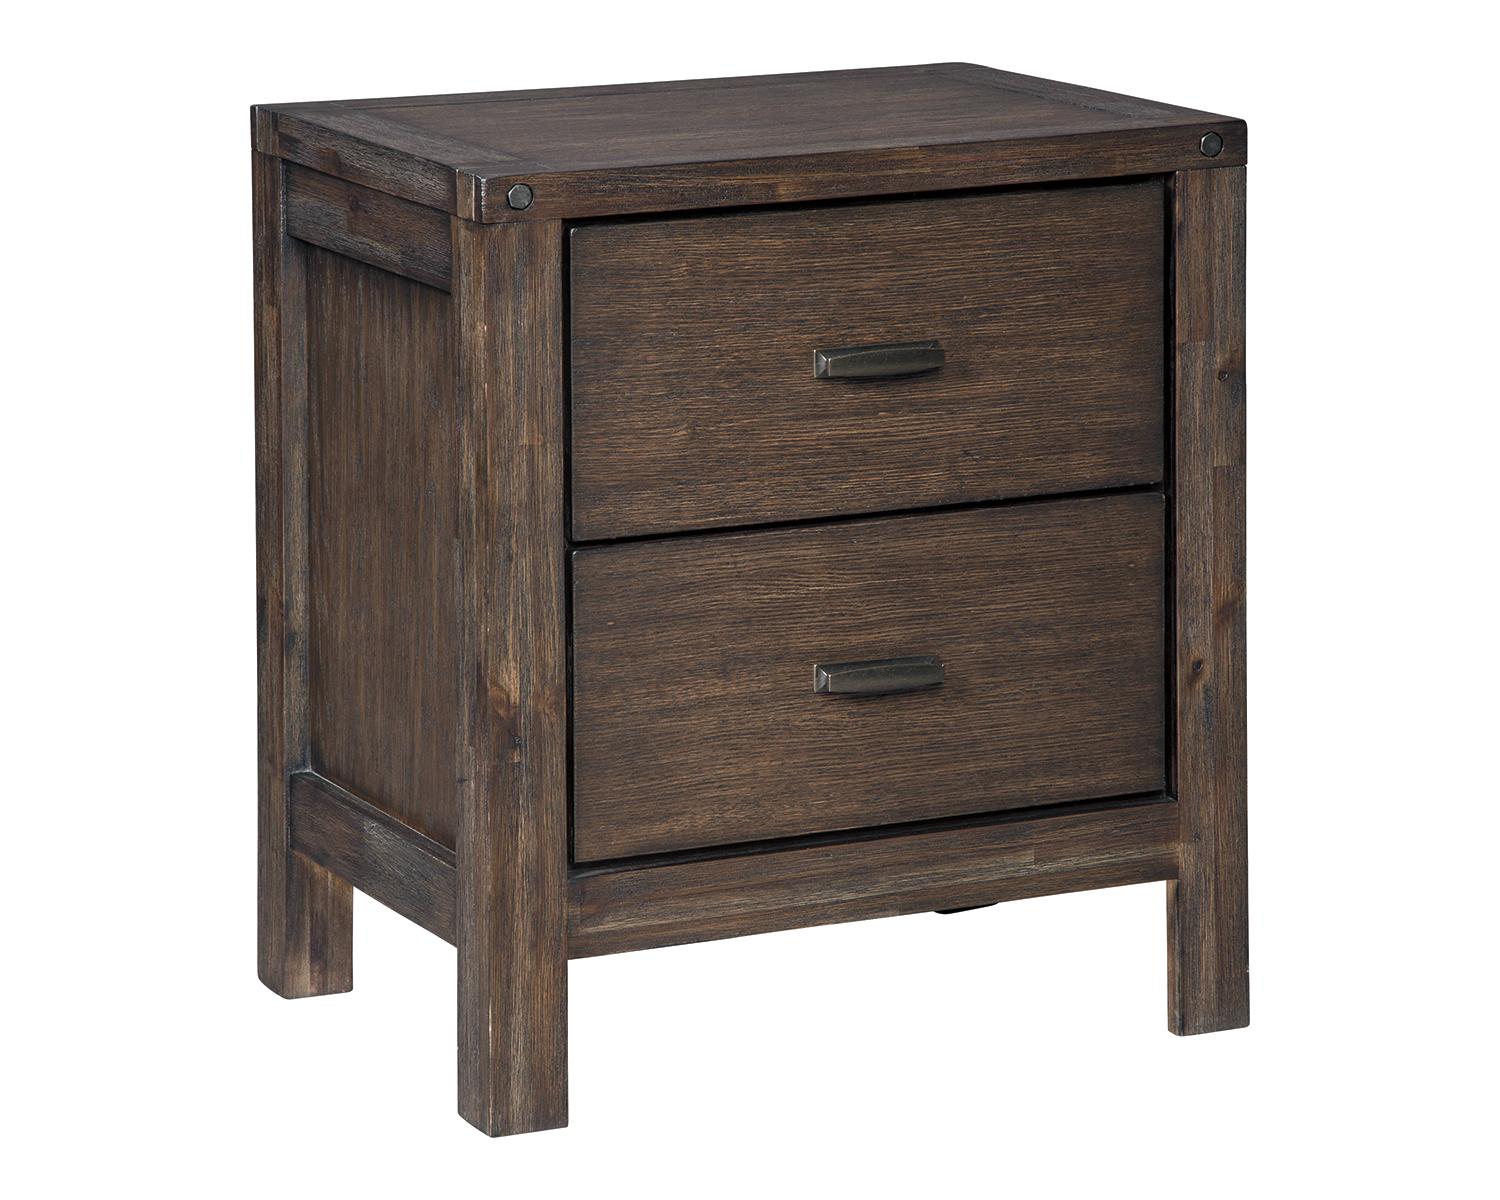 Signature Design by Ashley Dellbeck Dark Brown Two Drawer Night Stand - image 2 of 5